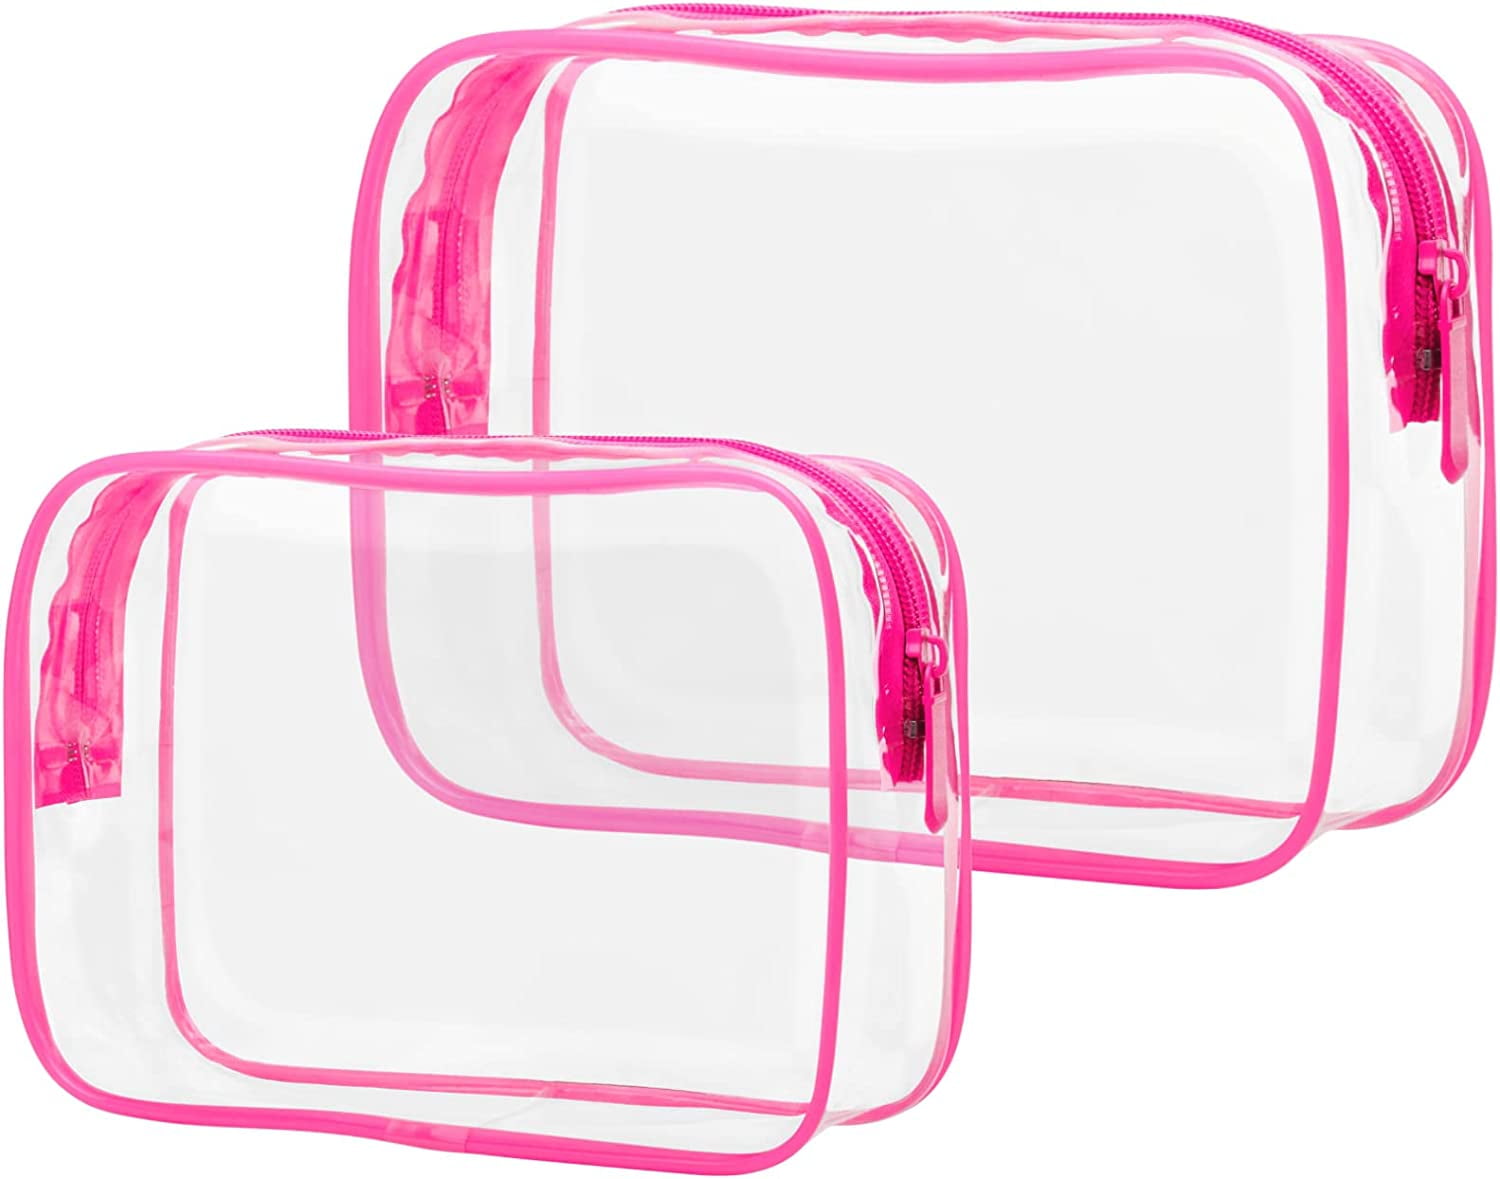 PACKISM Clear Makeup Bags - TSA Approved Toiletry Bag with Handle Large  Opening, Clear Toiletry Bags for Traveling Travel Essentials, Clear Travel